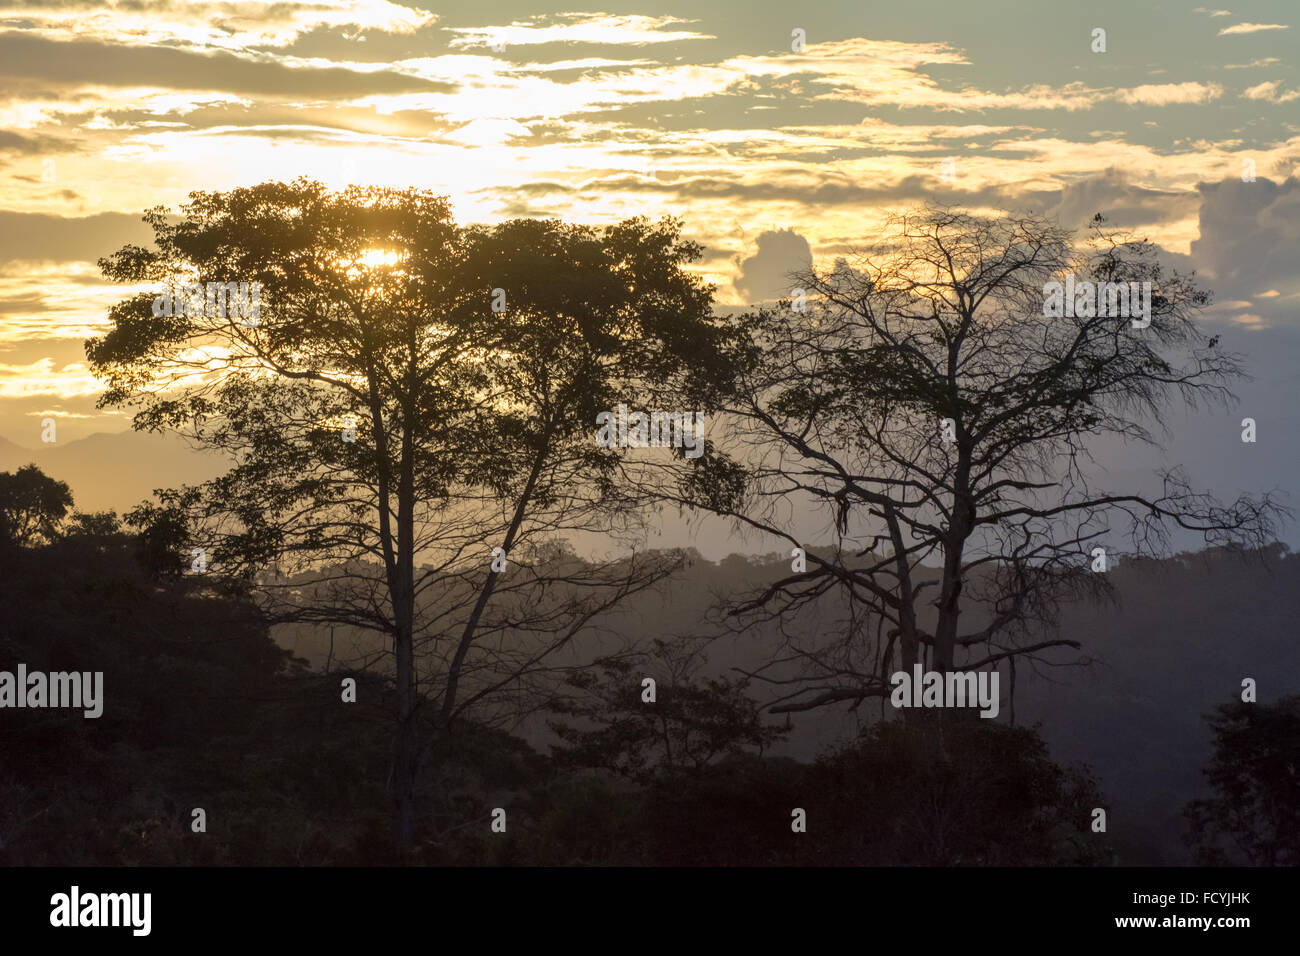 View looking out over tropical jungle at nightfall in Amazonas/San Martin region of northern Peru Stock Photo